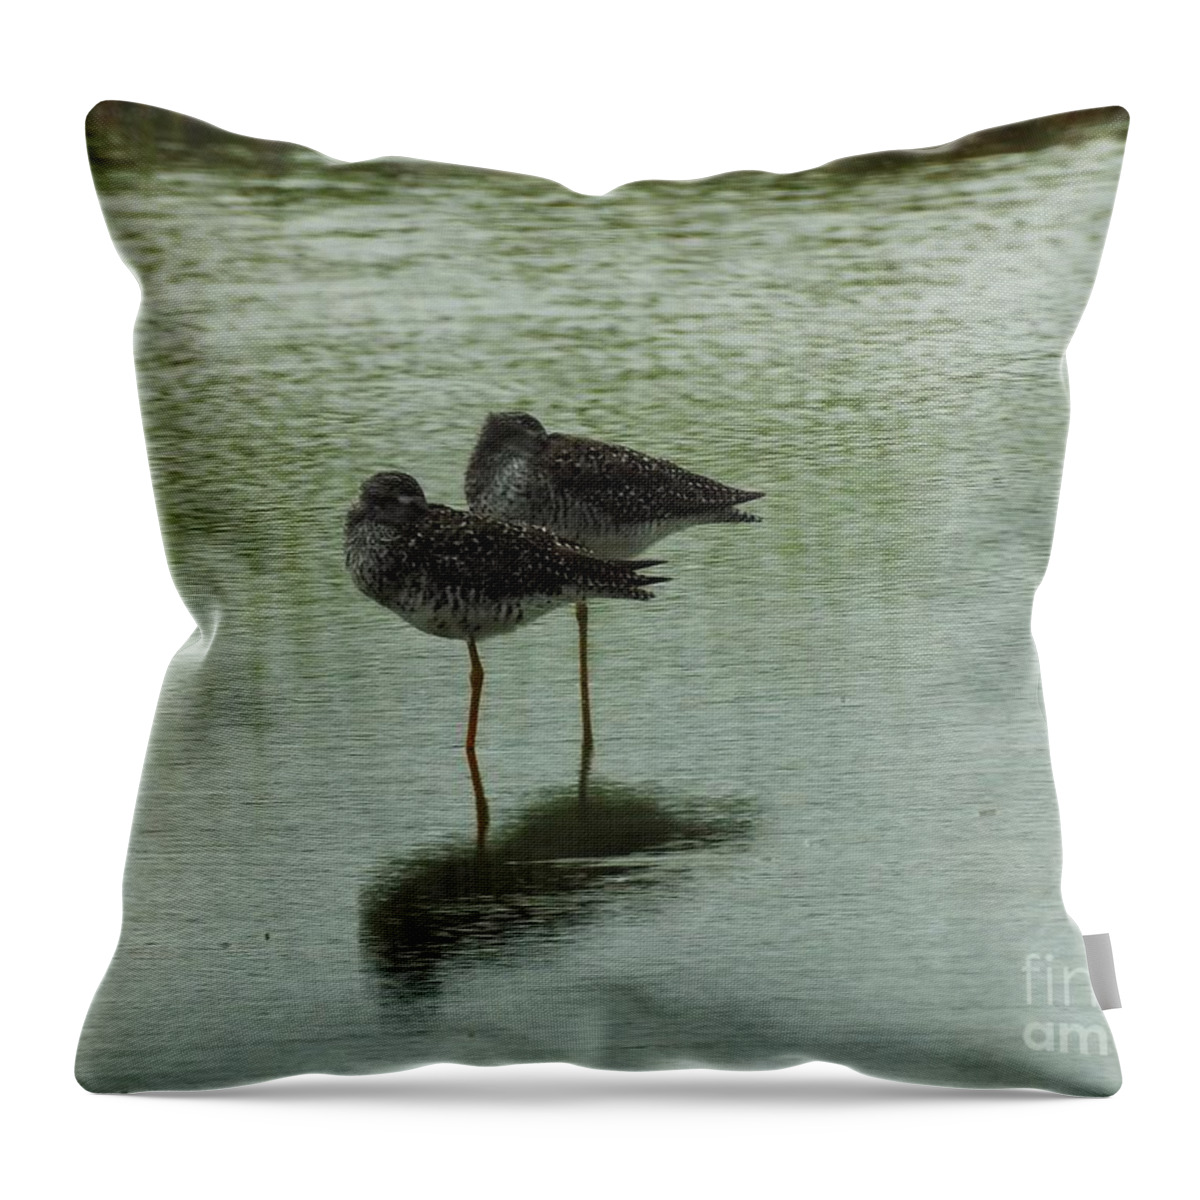 Birds Throw Pillow featuring the photograph Two Birds In The Marsh by Jan Gelders